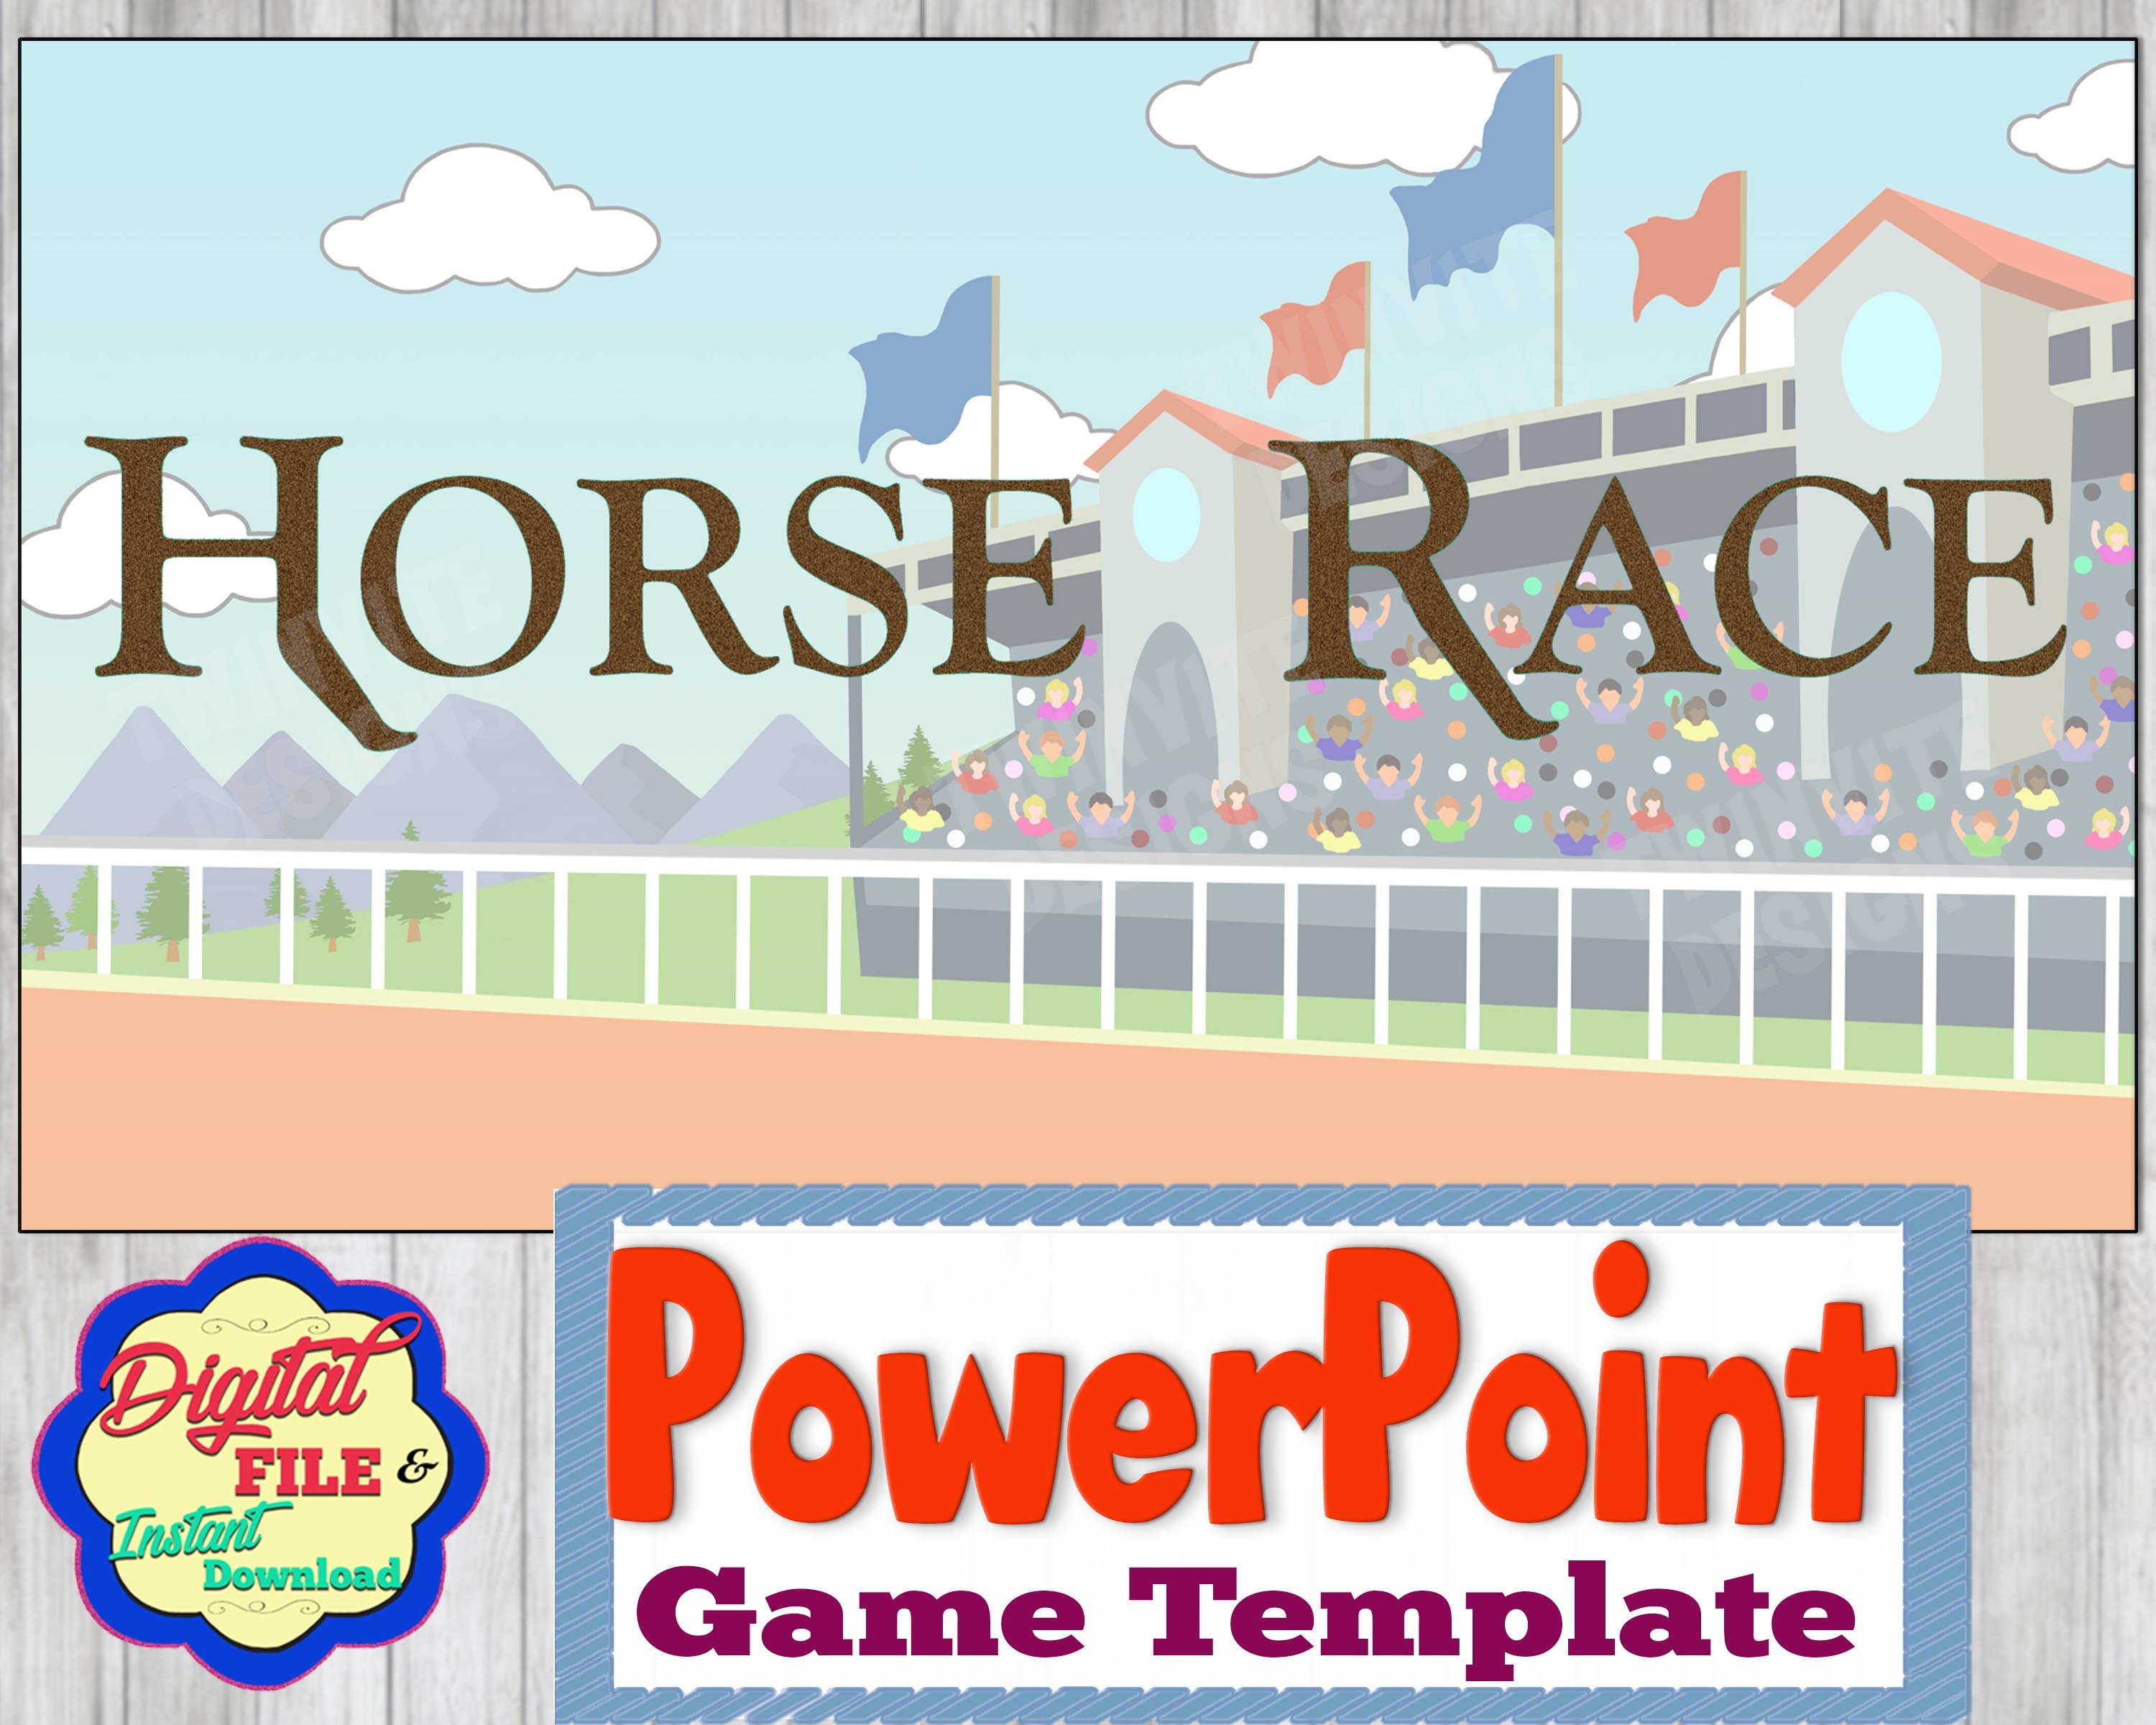 PPT - Which Free Solitaire Game Is The Best? PowerPoint